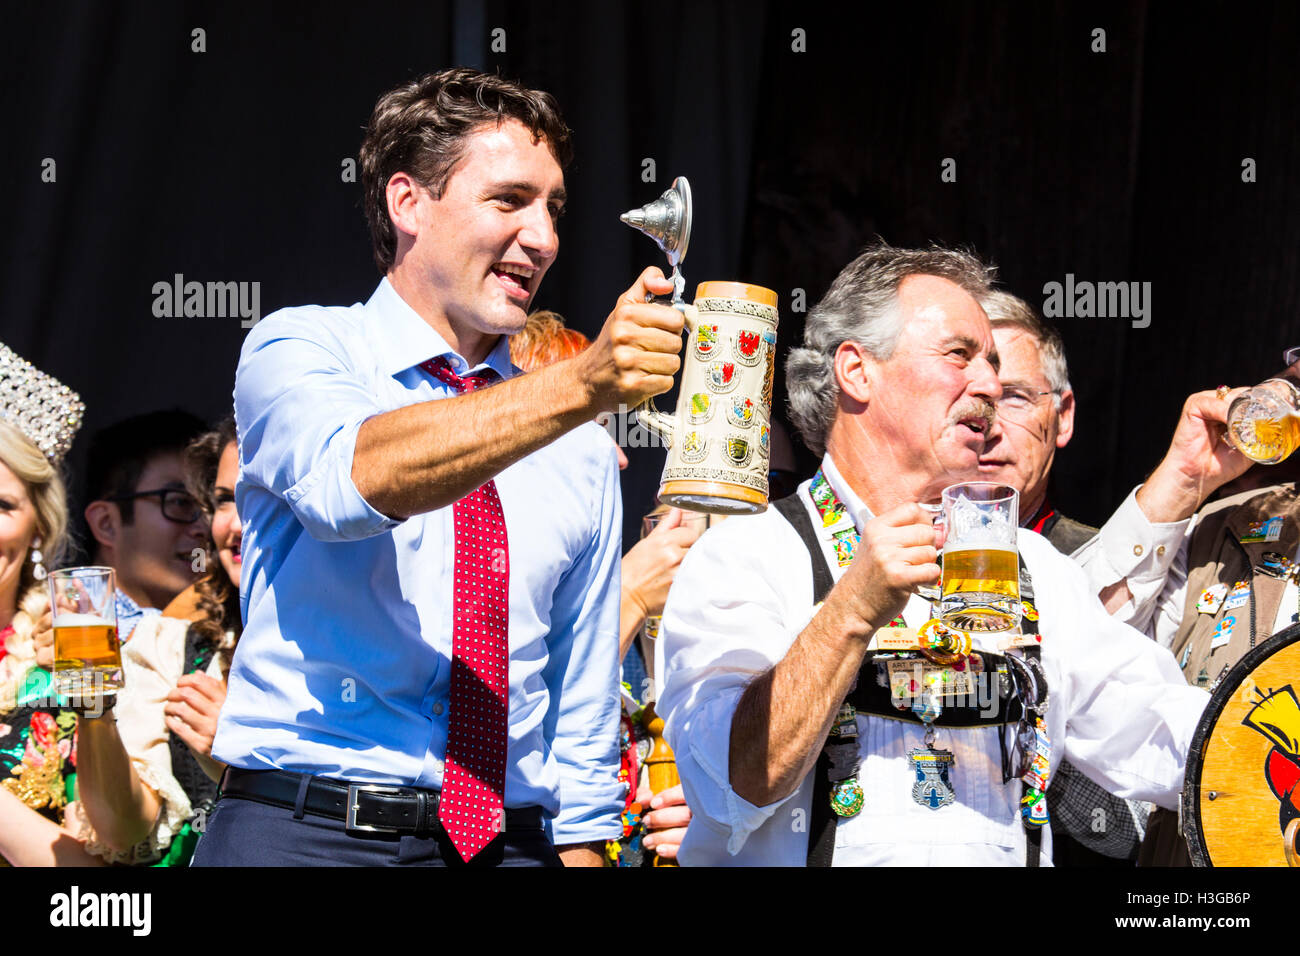 Kitchener, Ontario, Canada. 7th October, 2016. Official Opening of the 48 annual Kitchener Waterloo Oktoberfest , North America's largest Bavarian festival. Opening takes place at Kitchener City Hall with Canadian Prime Minister Justin Trudeau tapping the beer barrel. Credit:  Performance Image/Alamy Live News Stock Photo